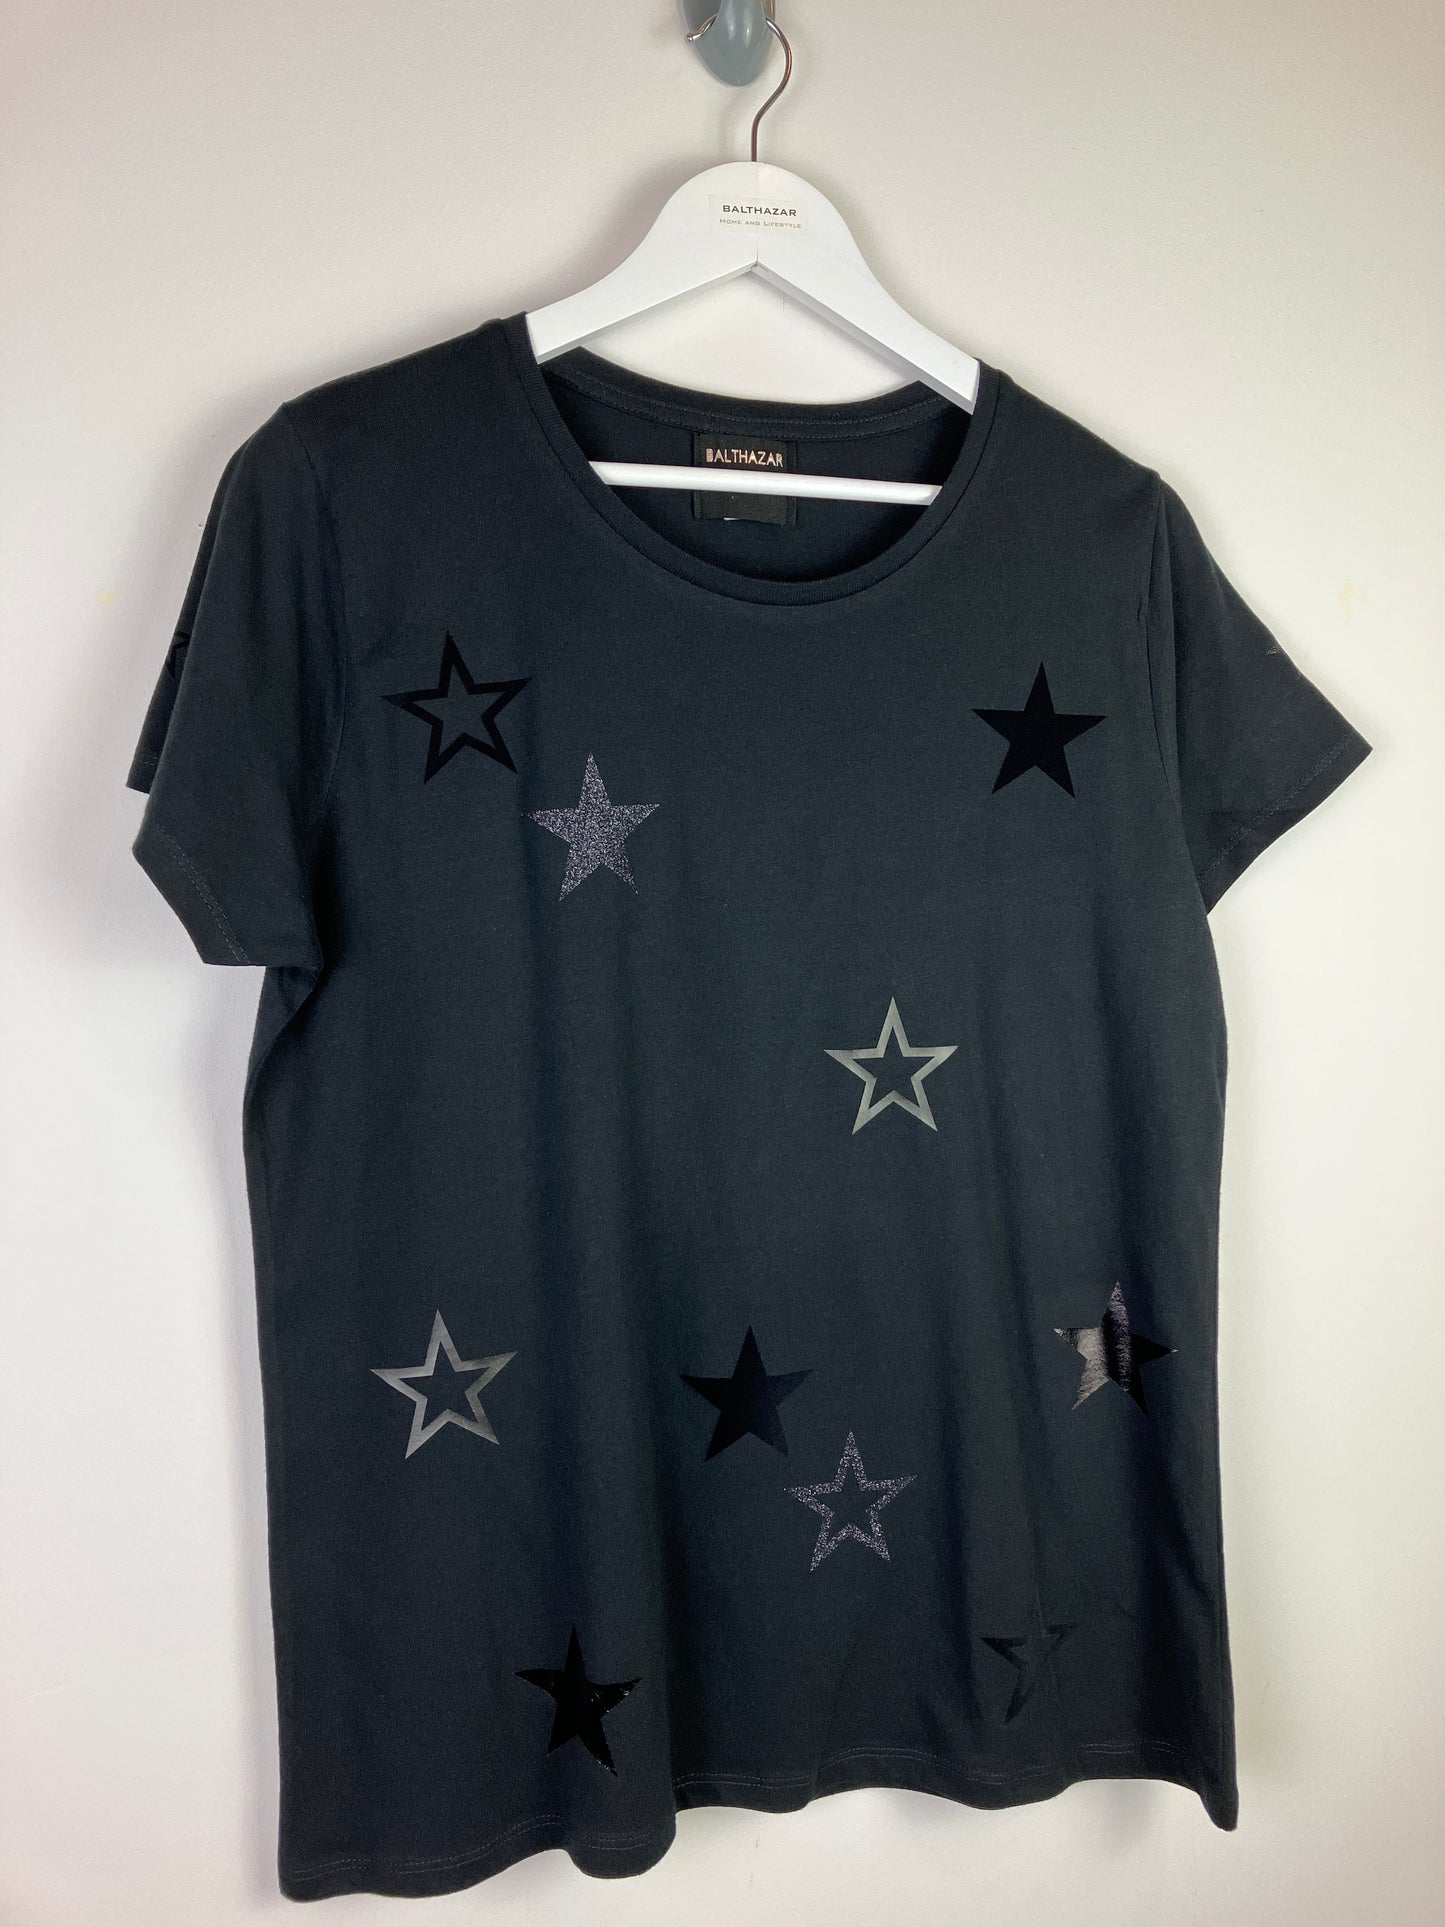 All the stars t-shirt - customisable block and outline stars